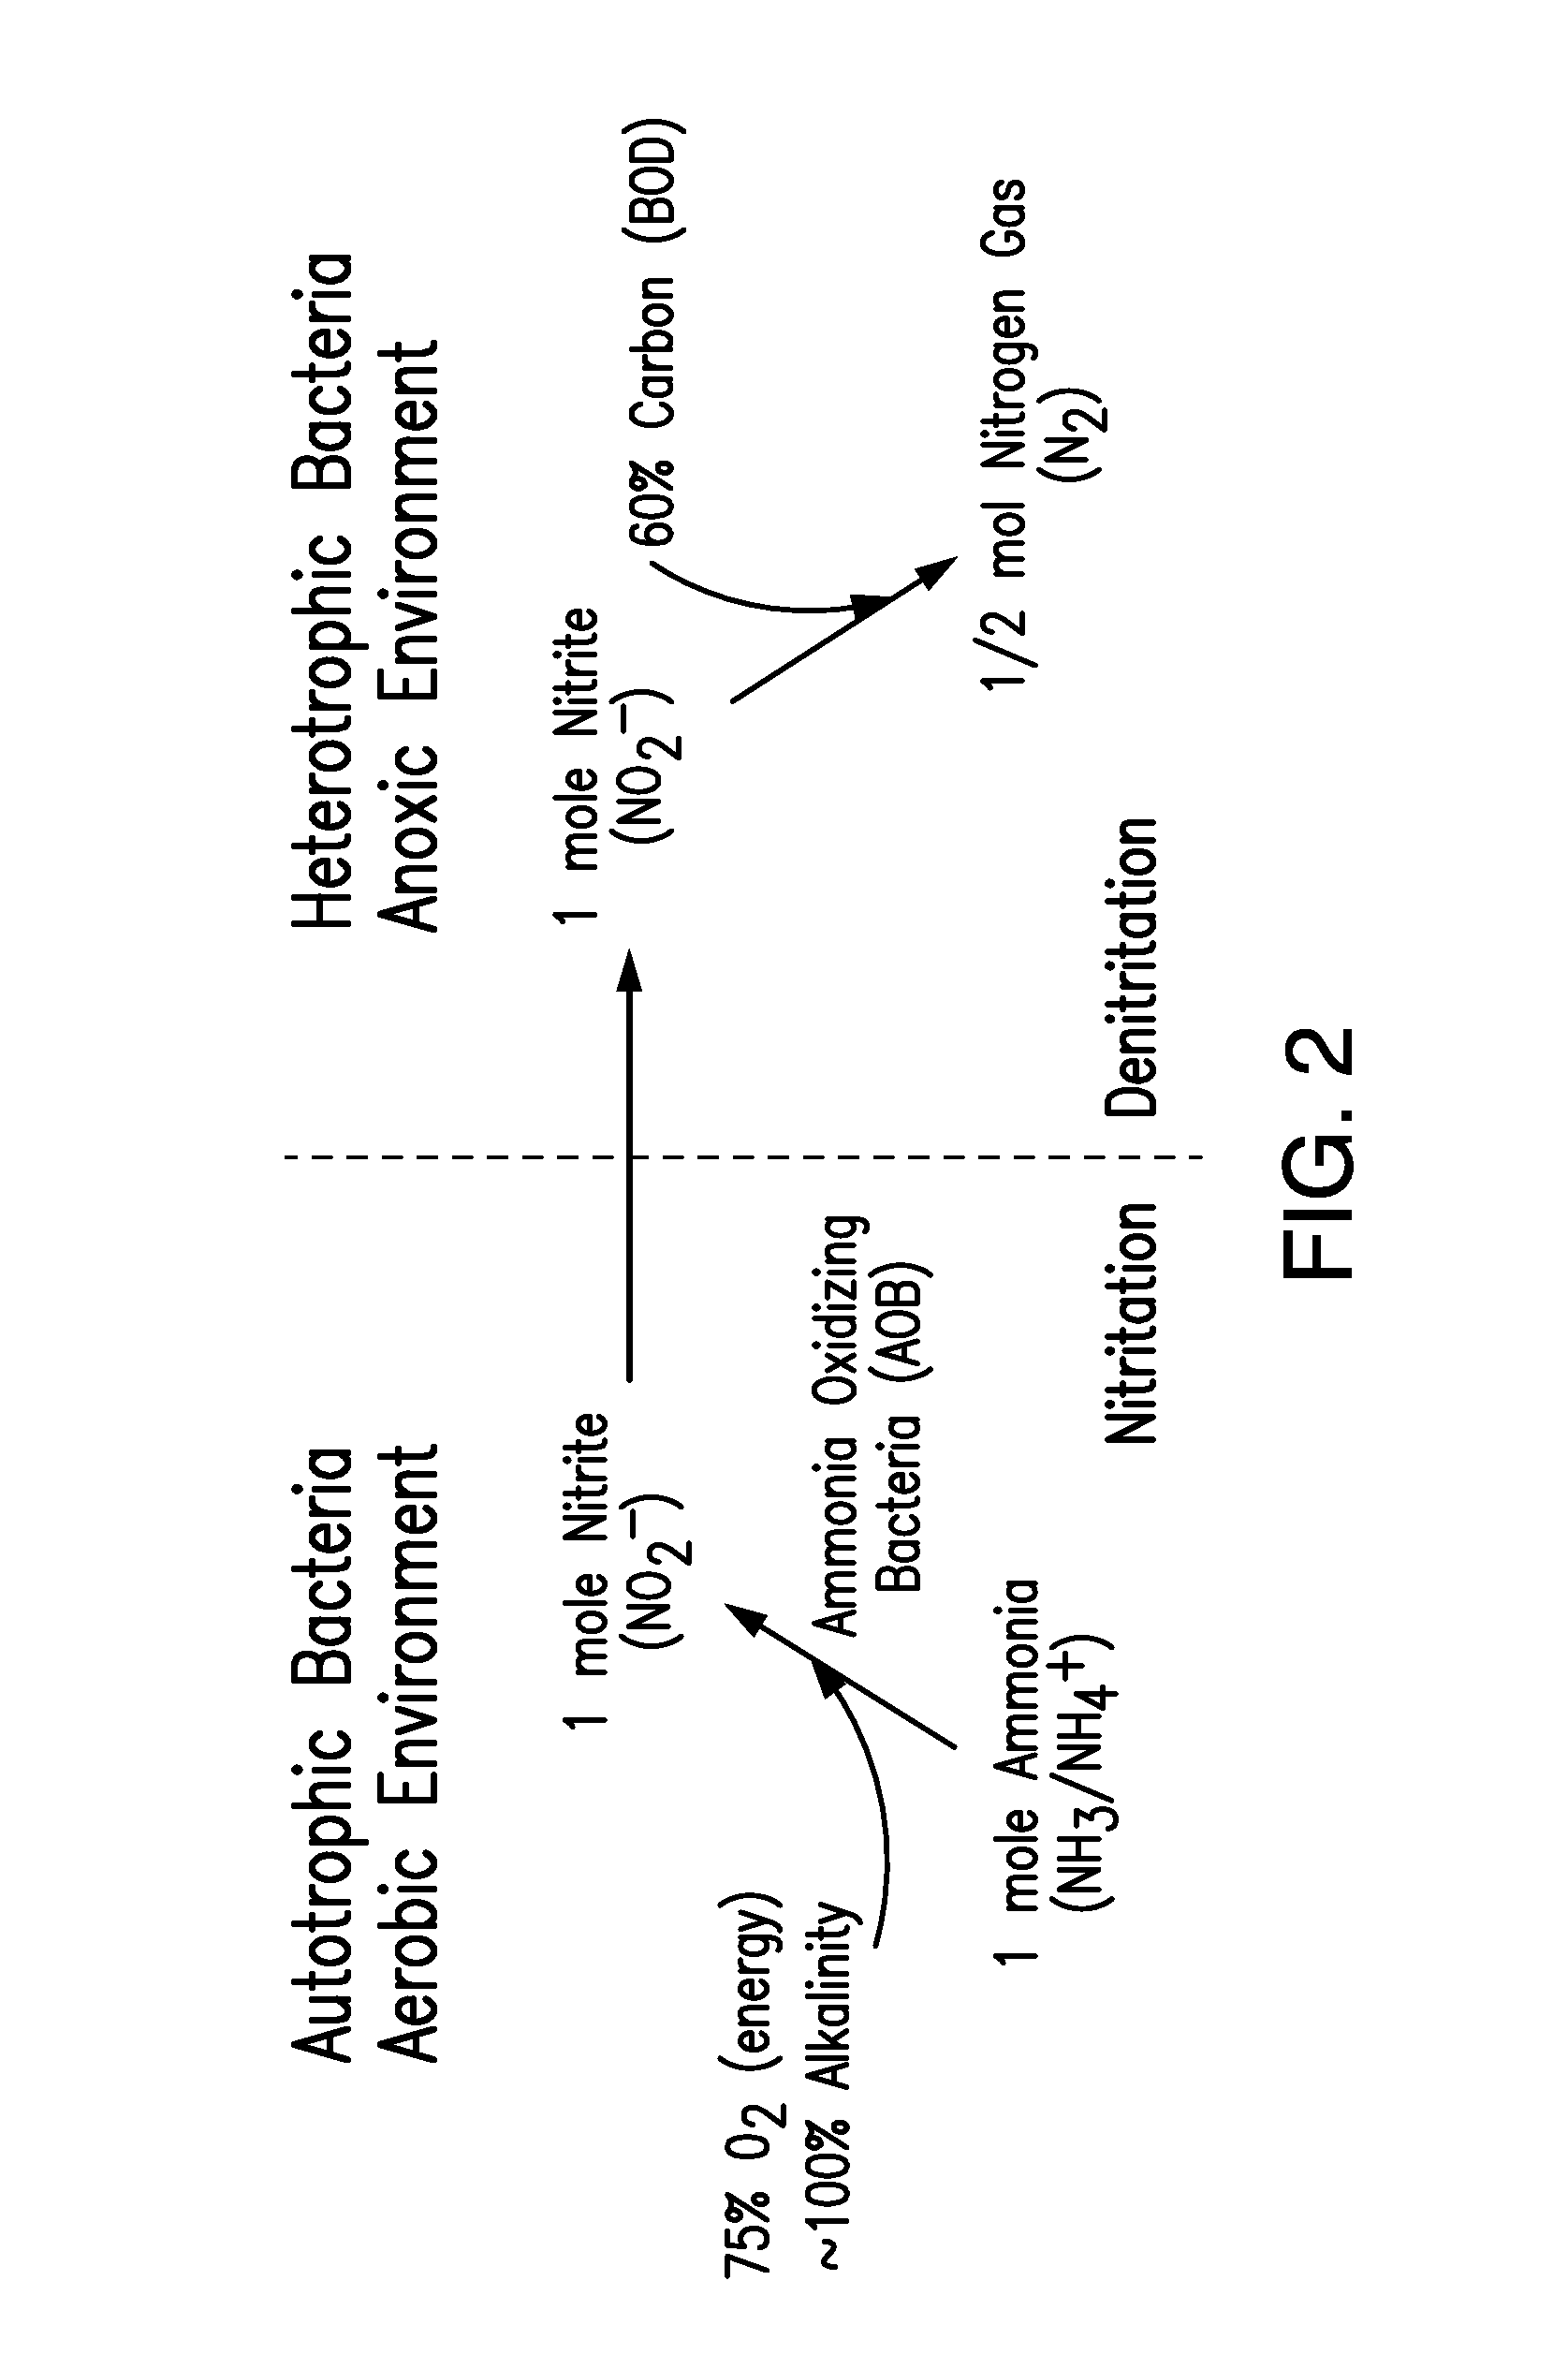 Method and apparatus for nitrogen removal in wastewater treatment